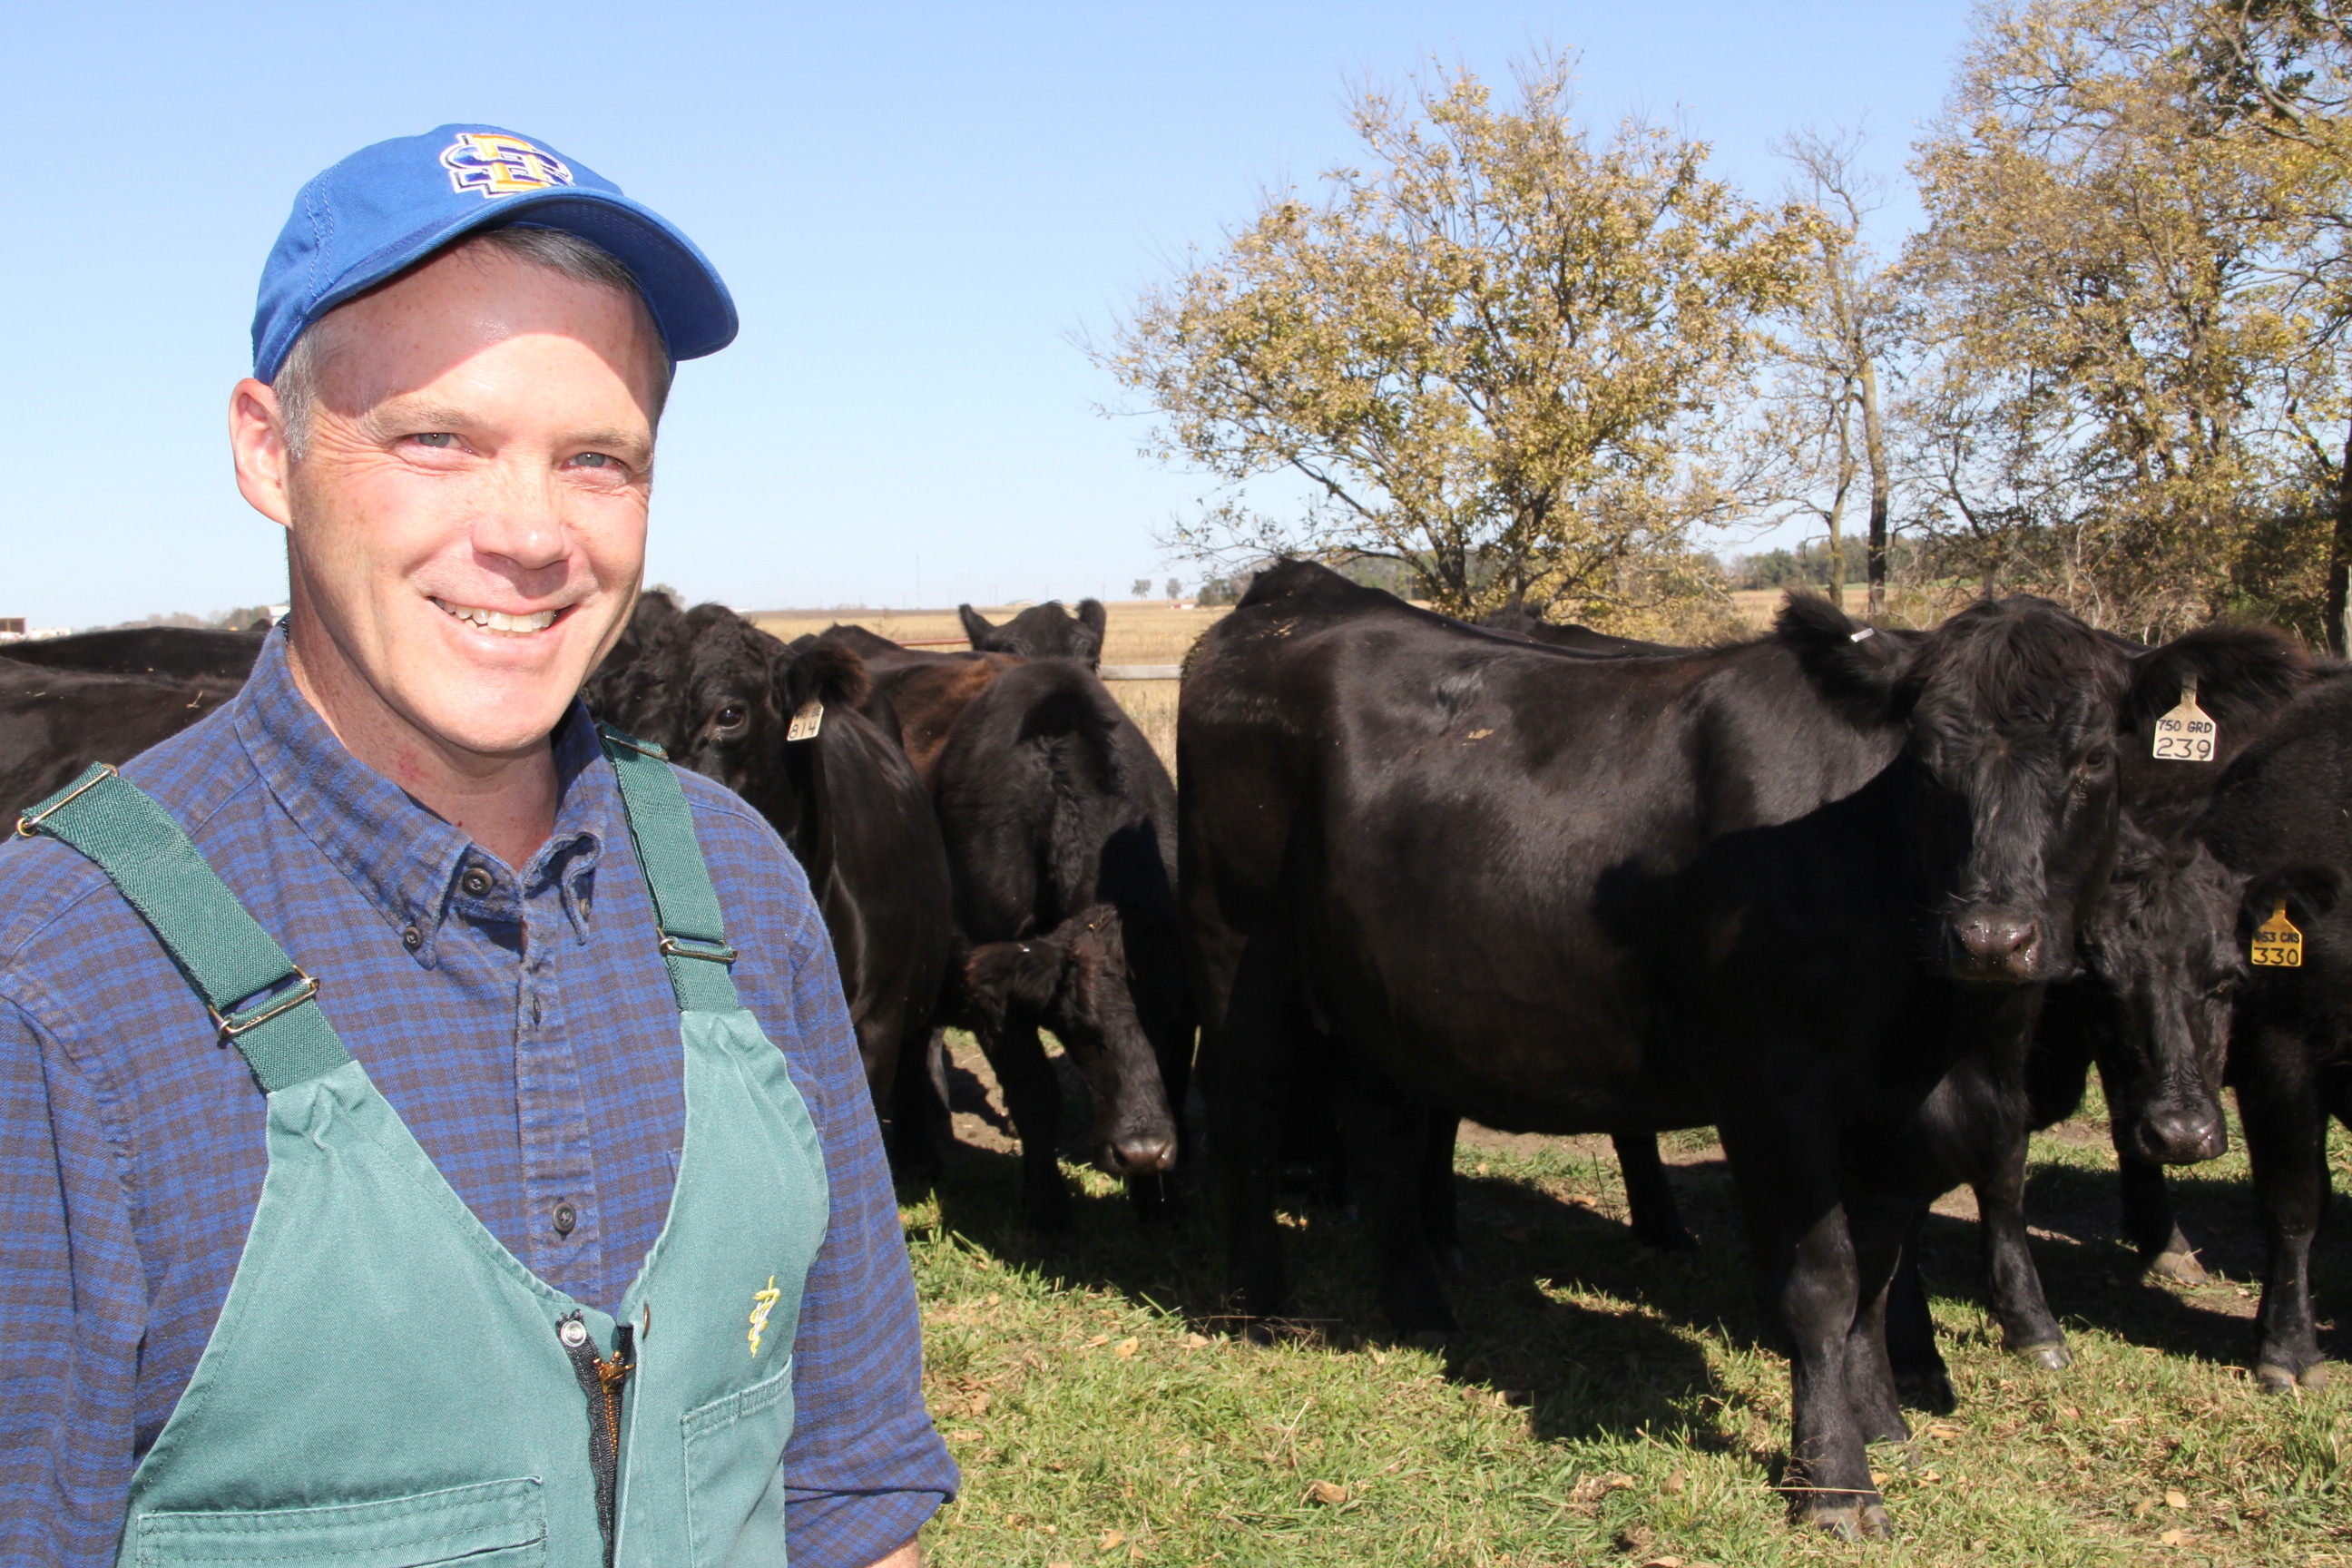 Russ Daly standing in front of a herd of cattle